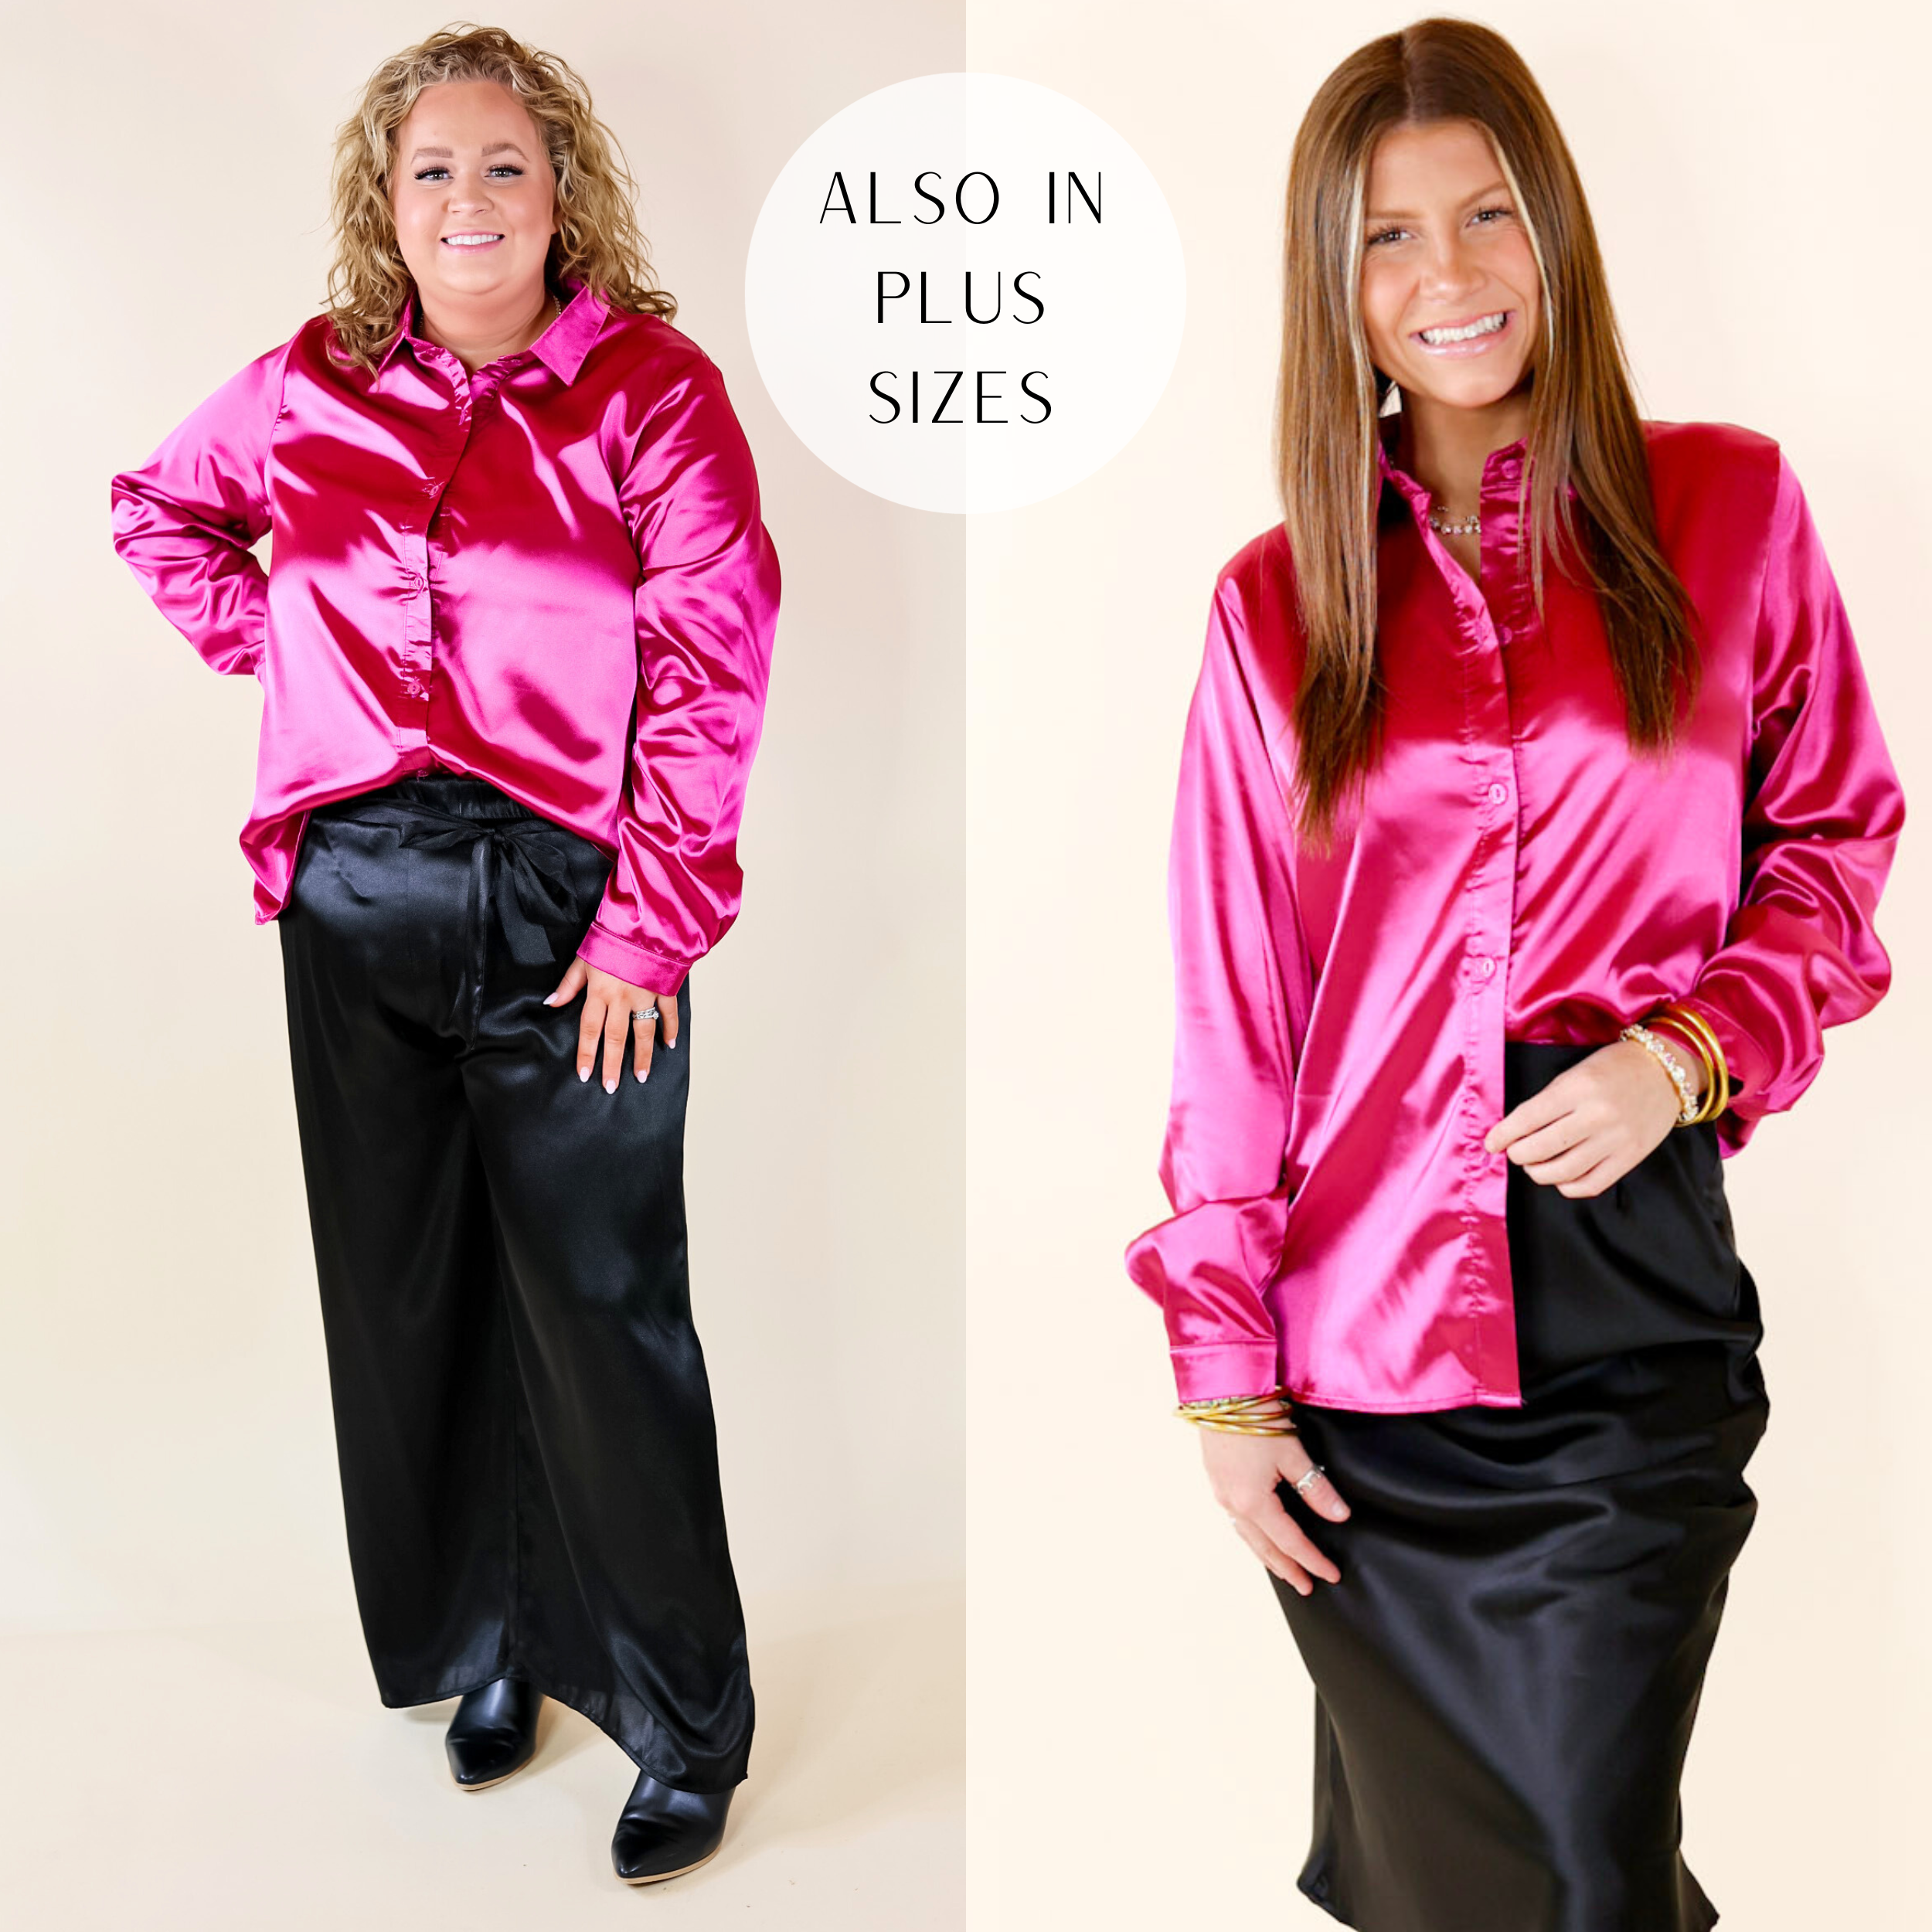 This is a long sleeve button up satin pink top. The model on the left is a size small and wearing it with a black skirt and black heels. The model on the right is a size 2X and is wearing it with black pants and black shoes.